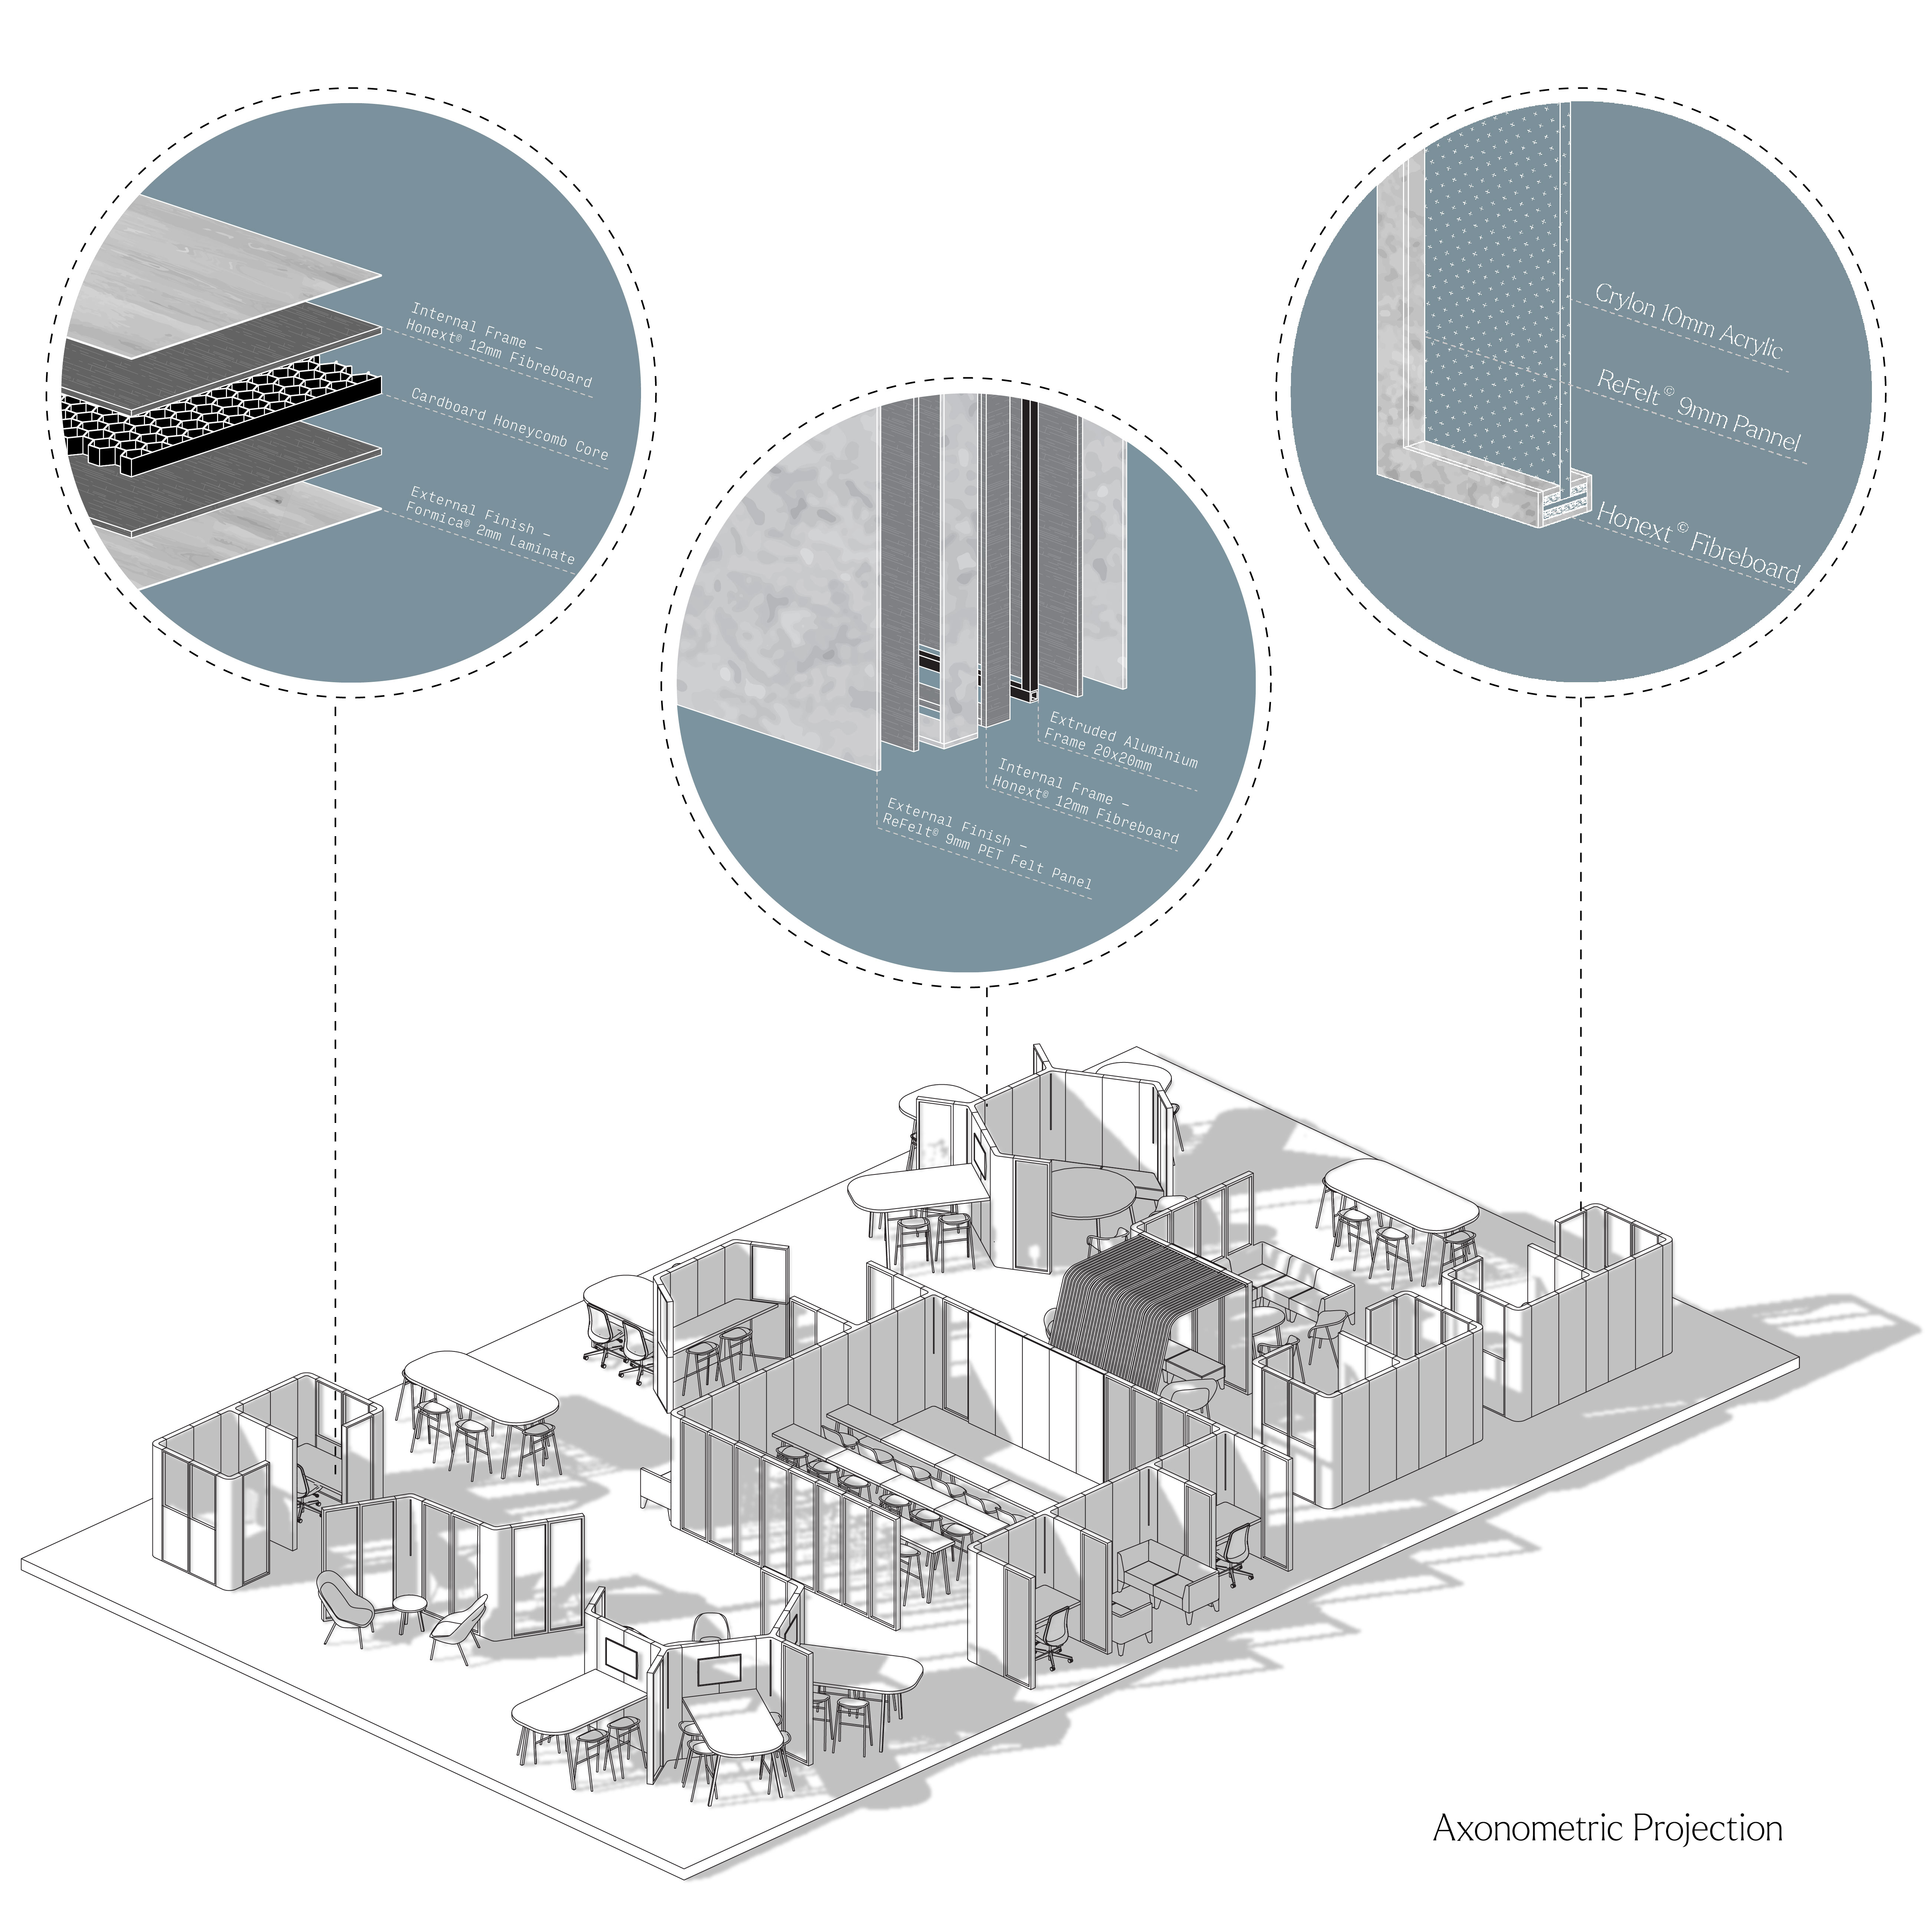 An axonometric projection and construction details of modular dividers and room layout.